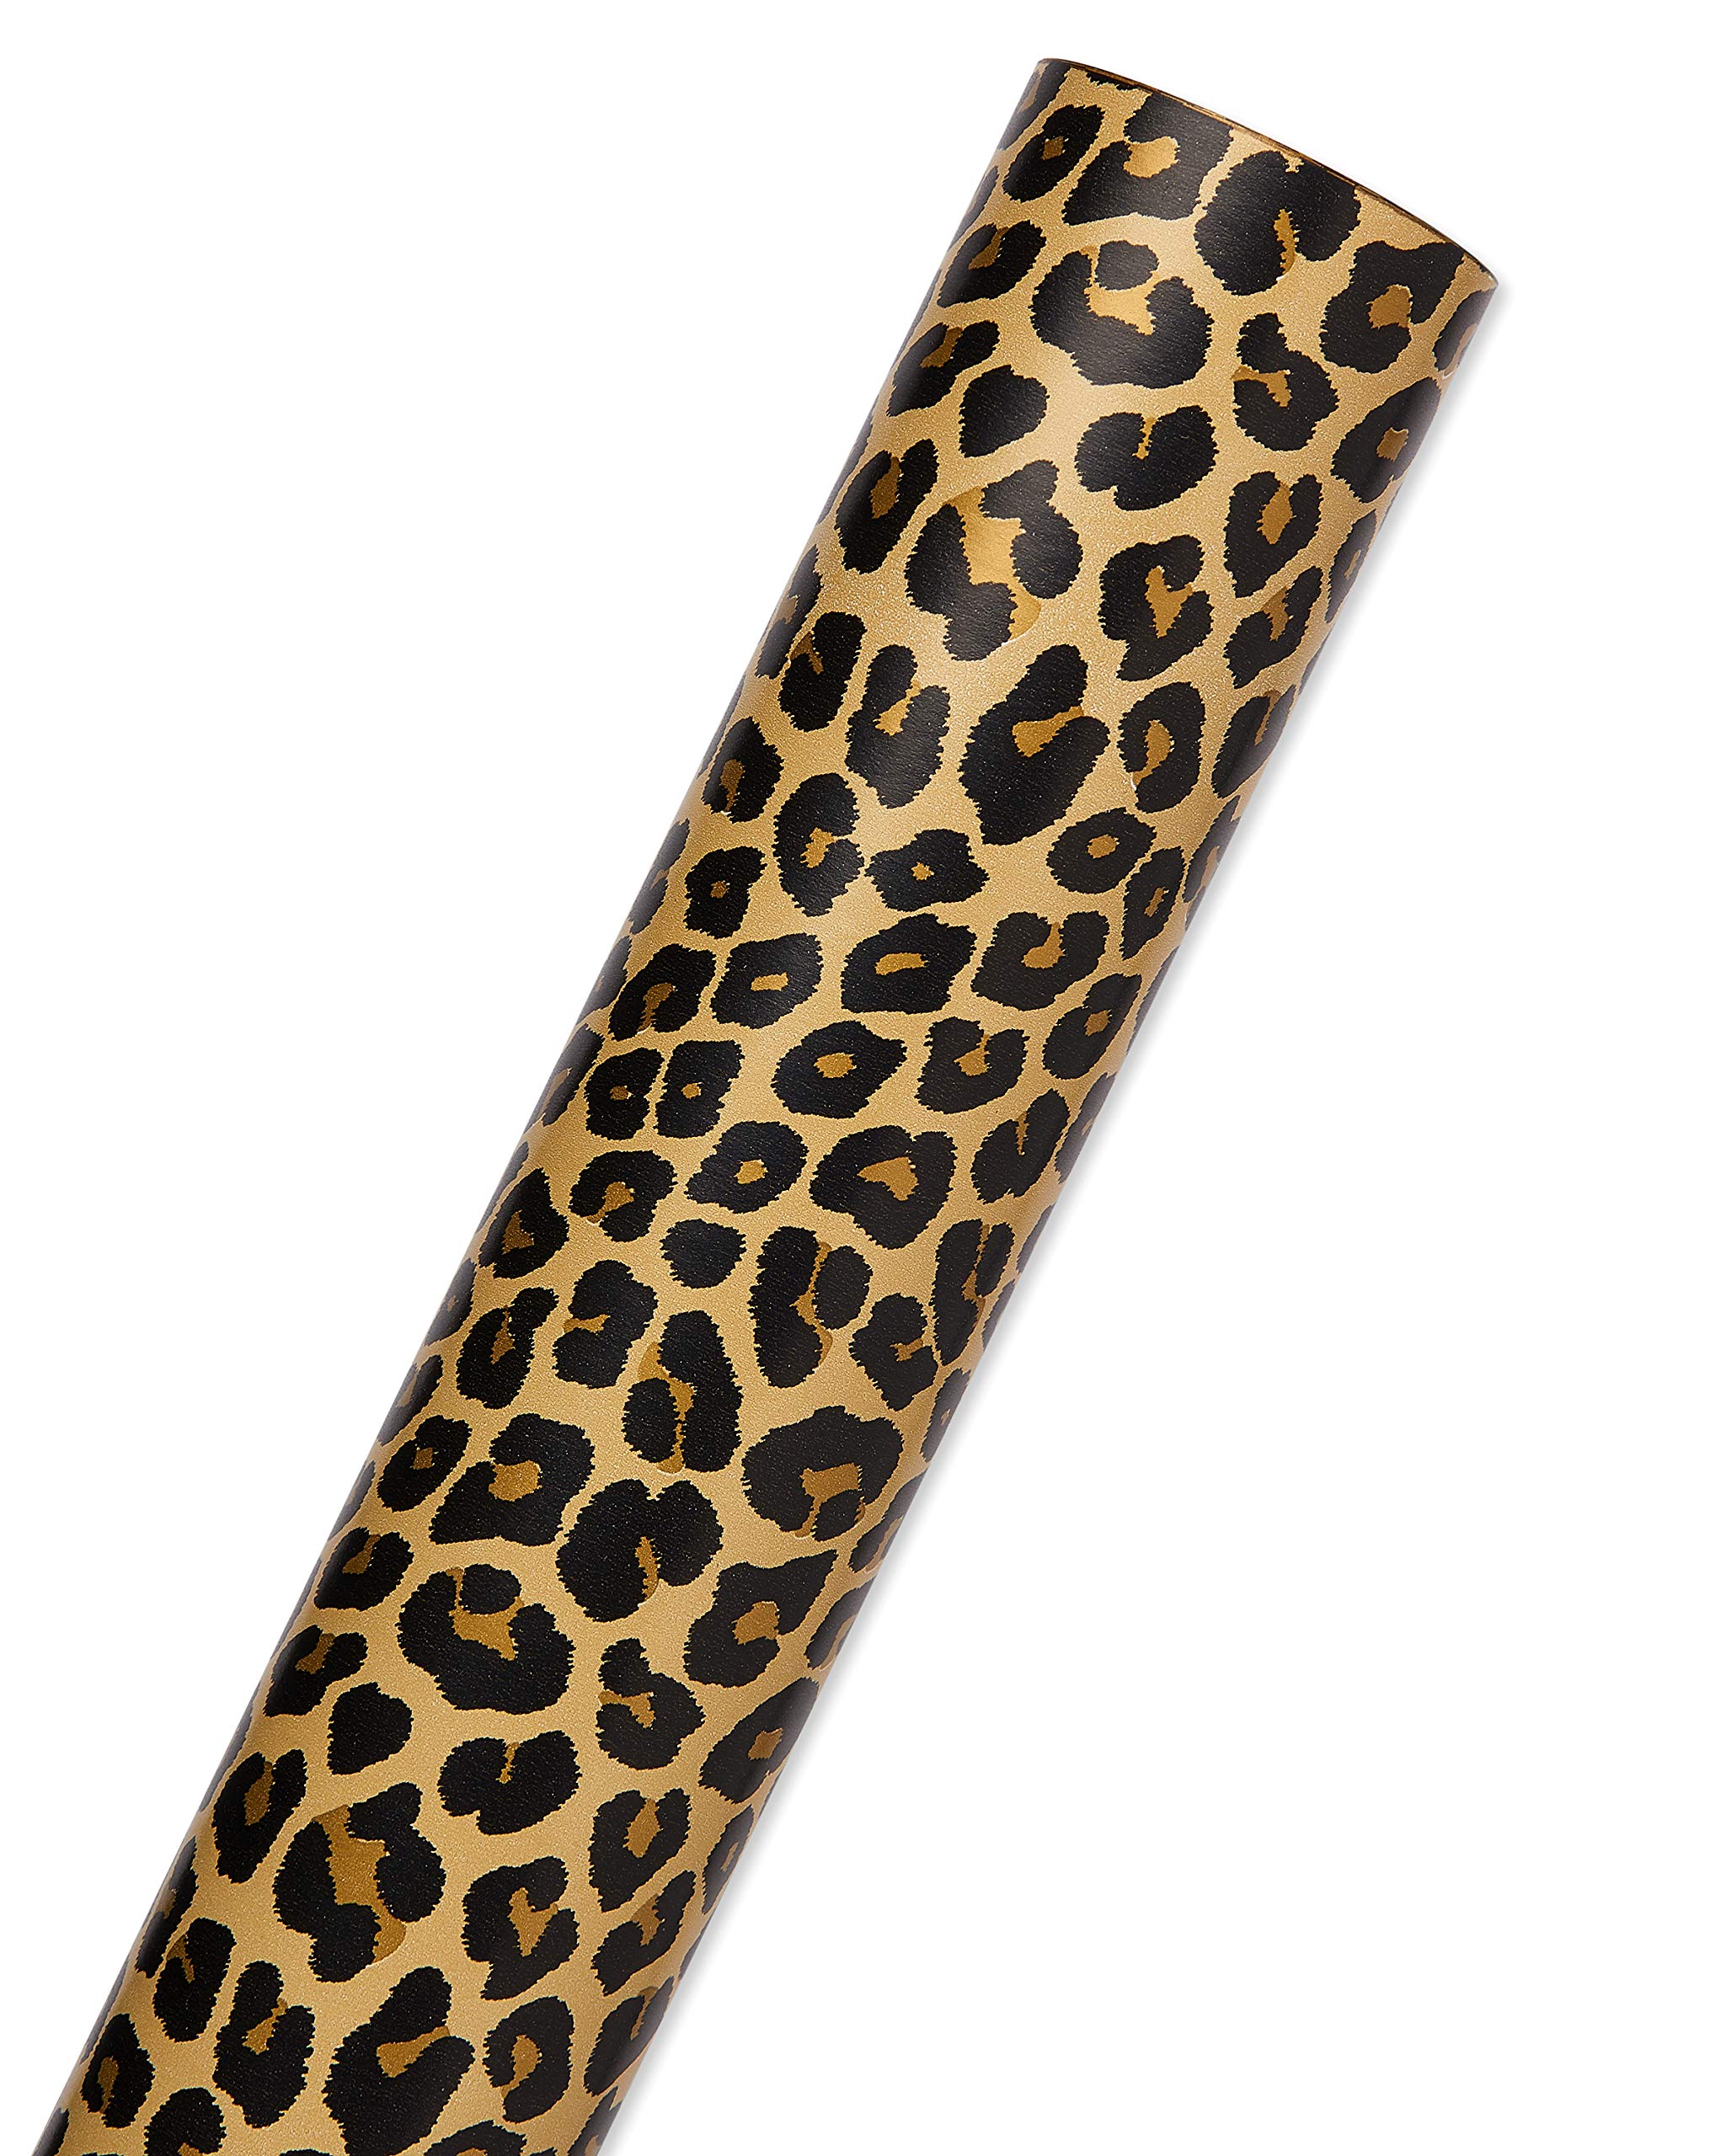 American Greetings Reversible Wrapping Paper Jumbo Roll for Birthdays, Graduation and All Occasions, Leopard and Gold (1 Roll, 175 sq. ft.)